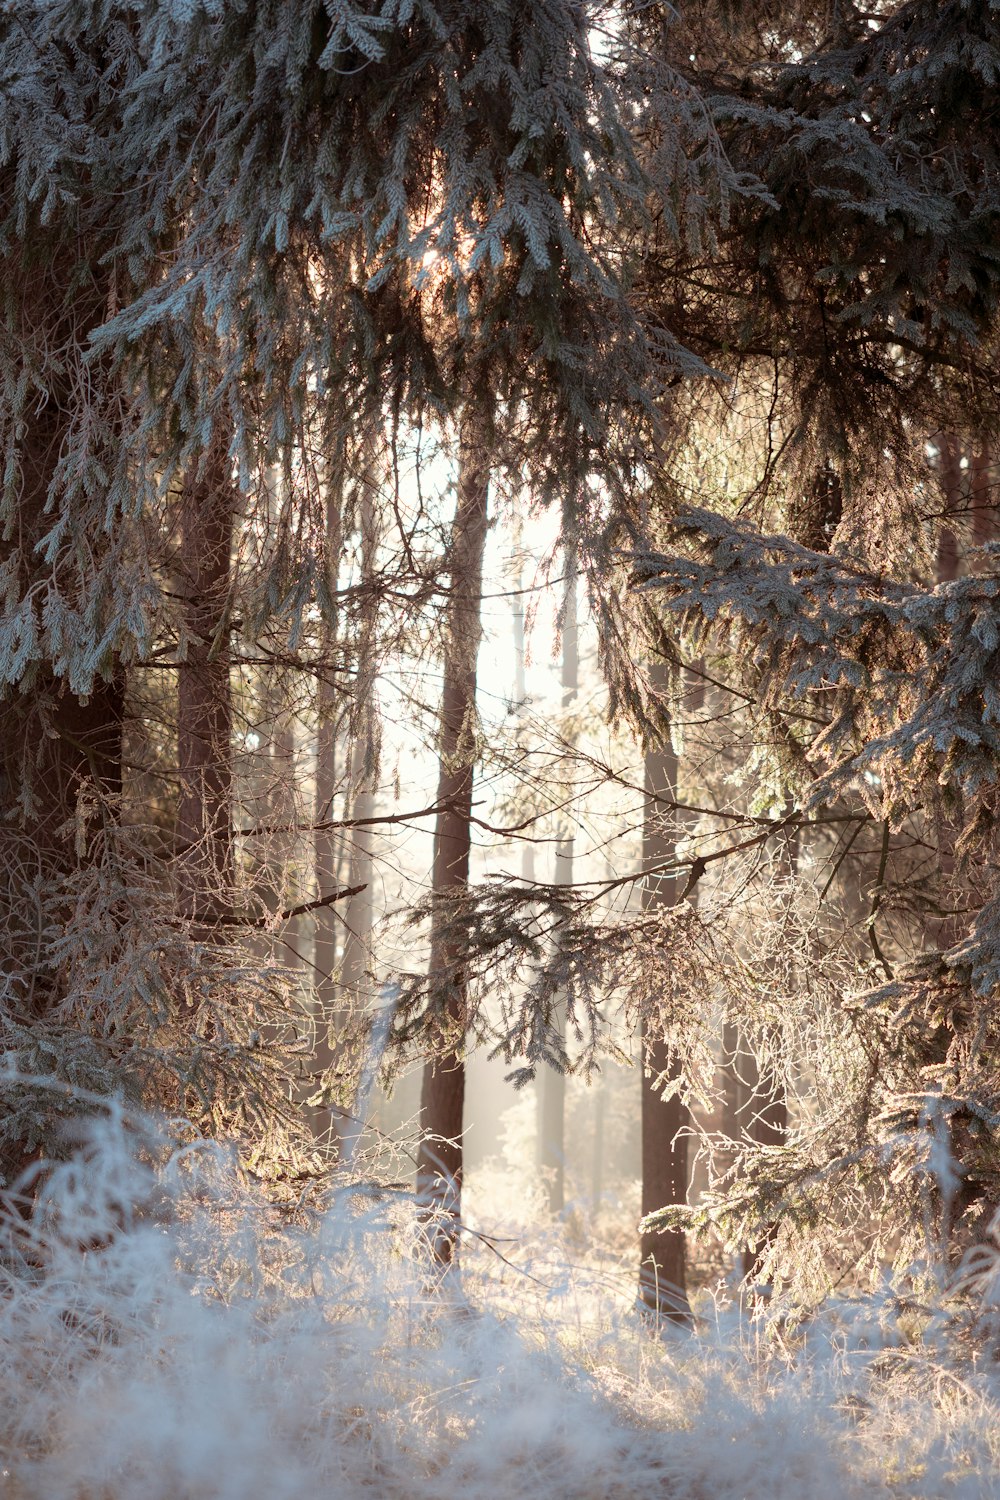 a snowy forest with trees